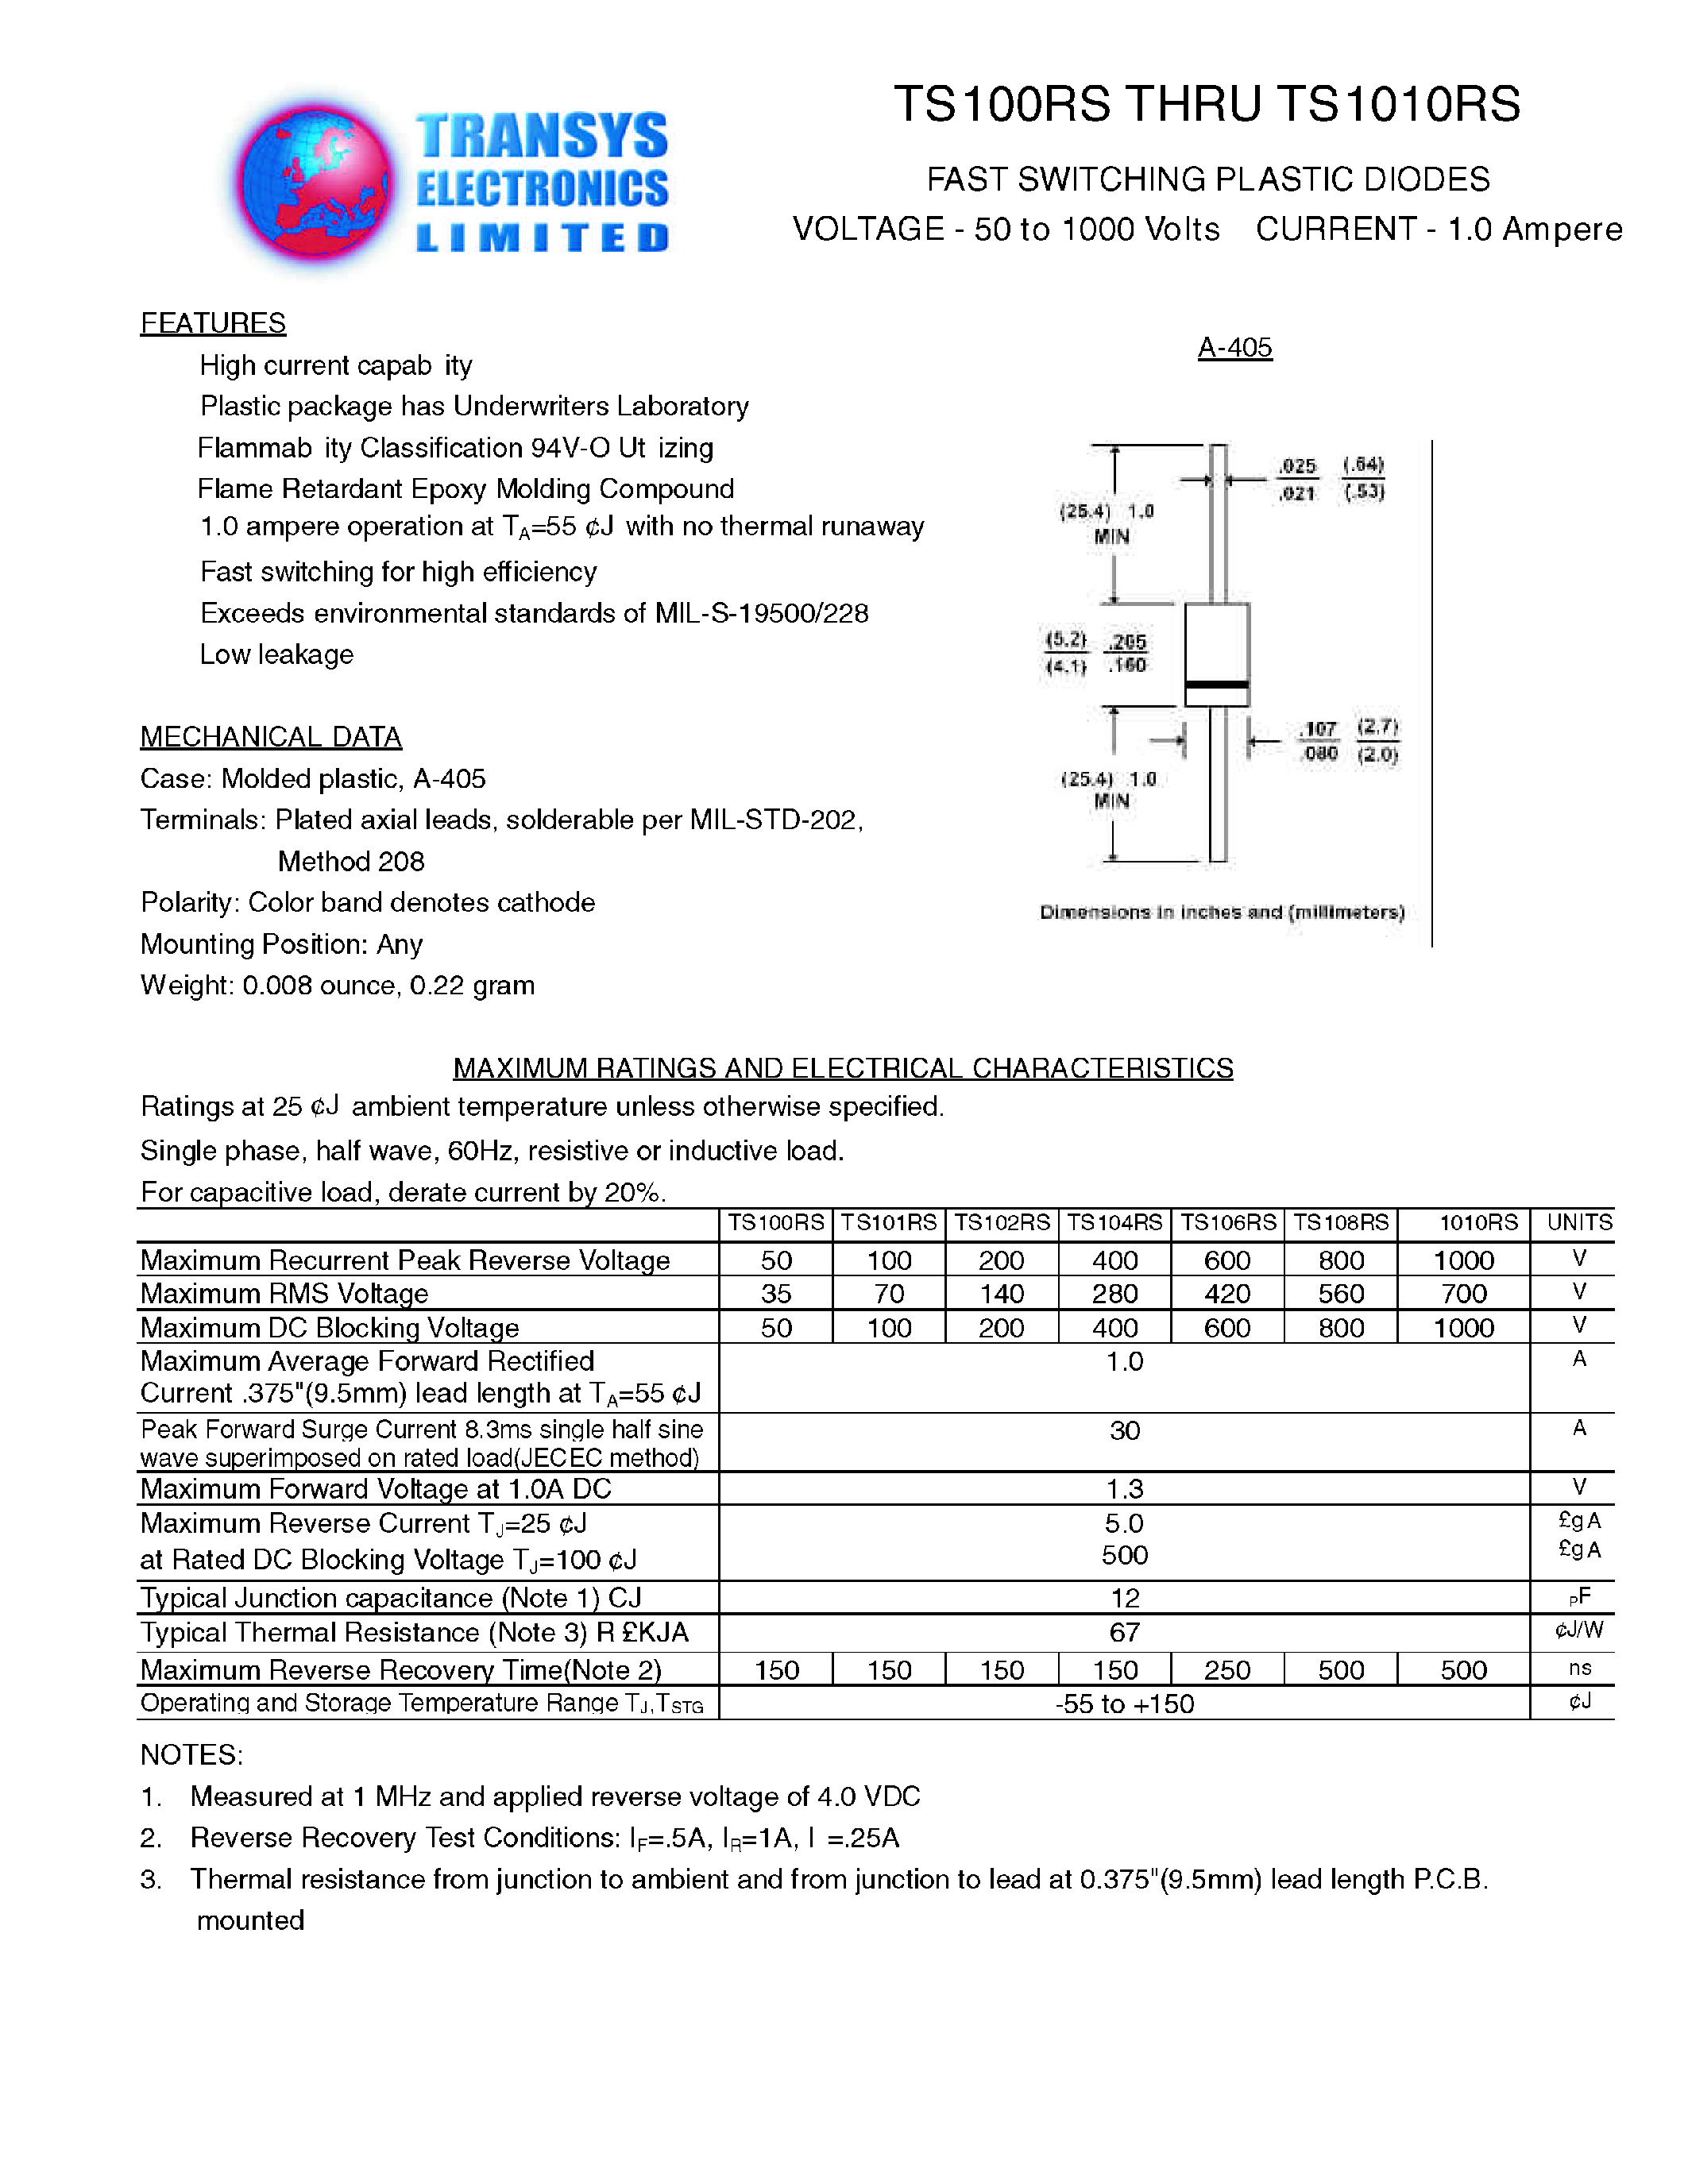 Datasheet TS100RS - FAST SWITCHING PLASTIC DIODES page 1